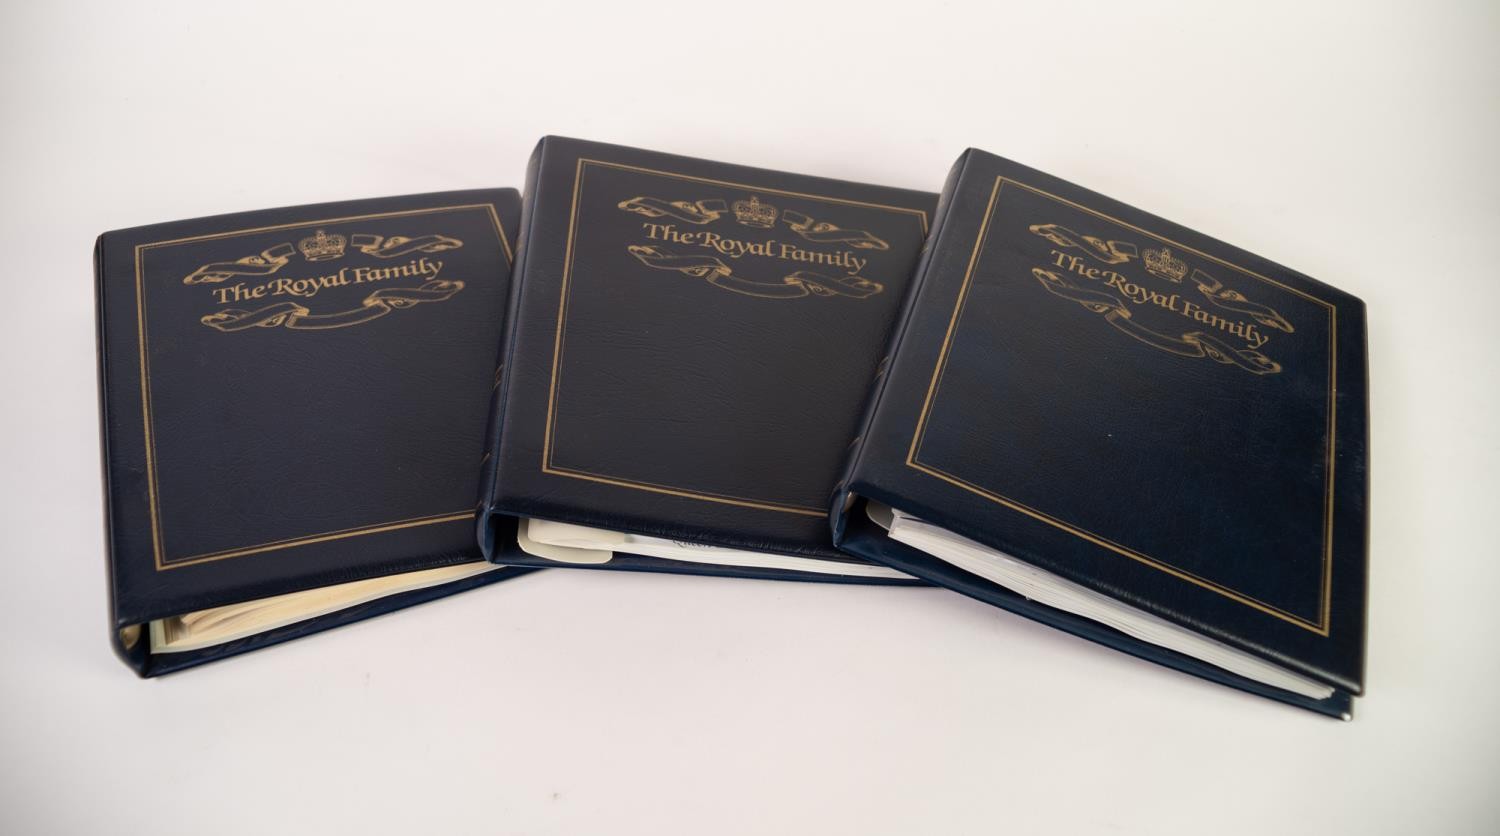 THREE BLUE BINDERS COMMEMORATING THE ROYAL FAMILY